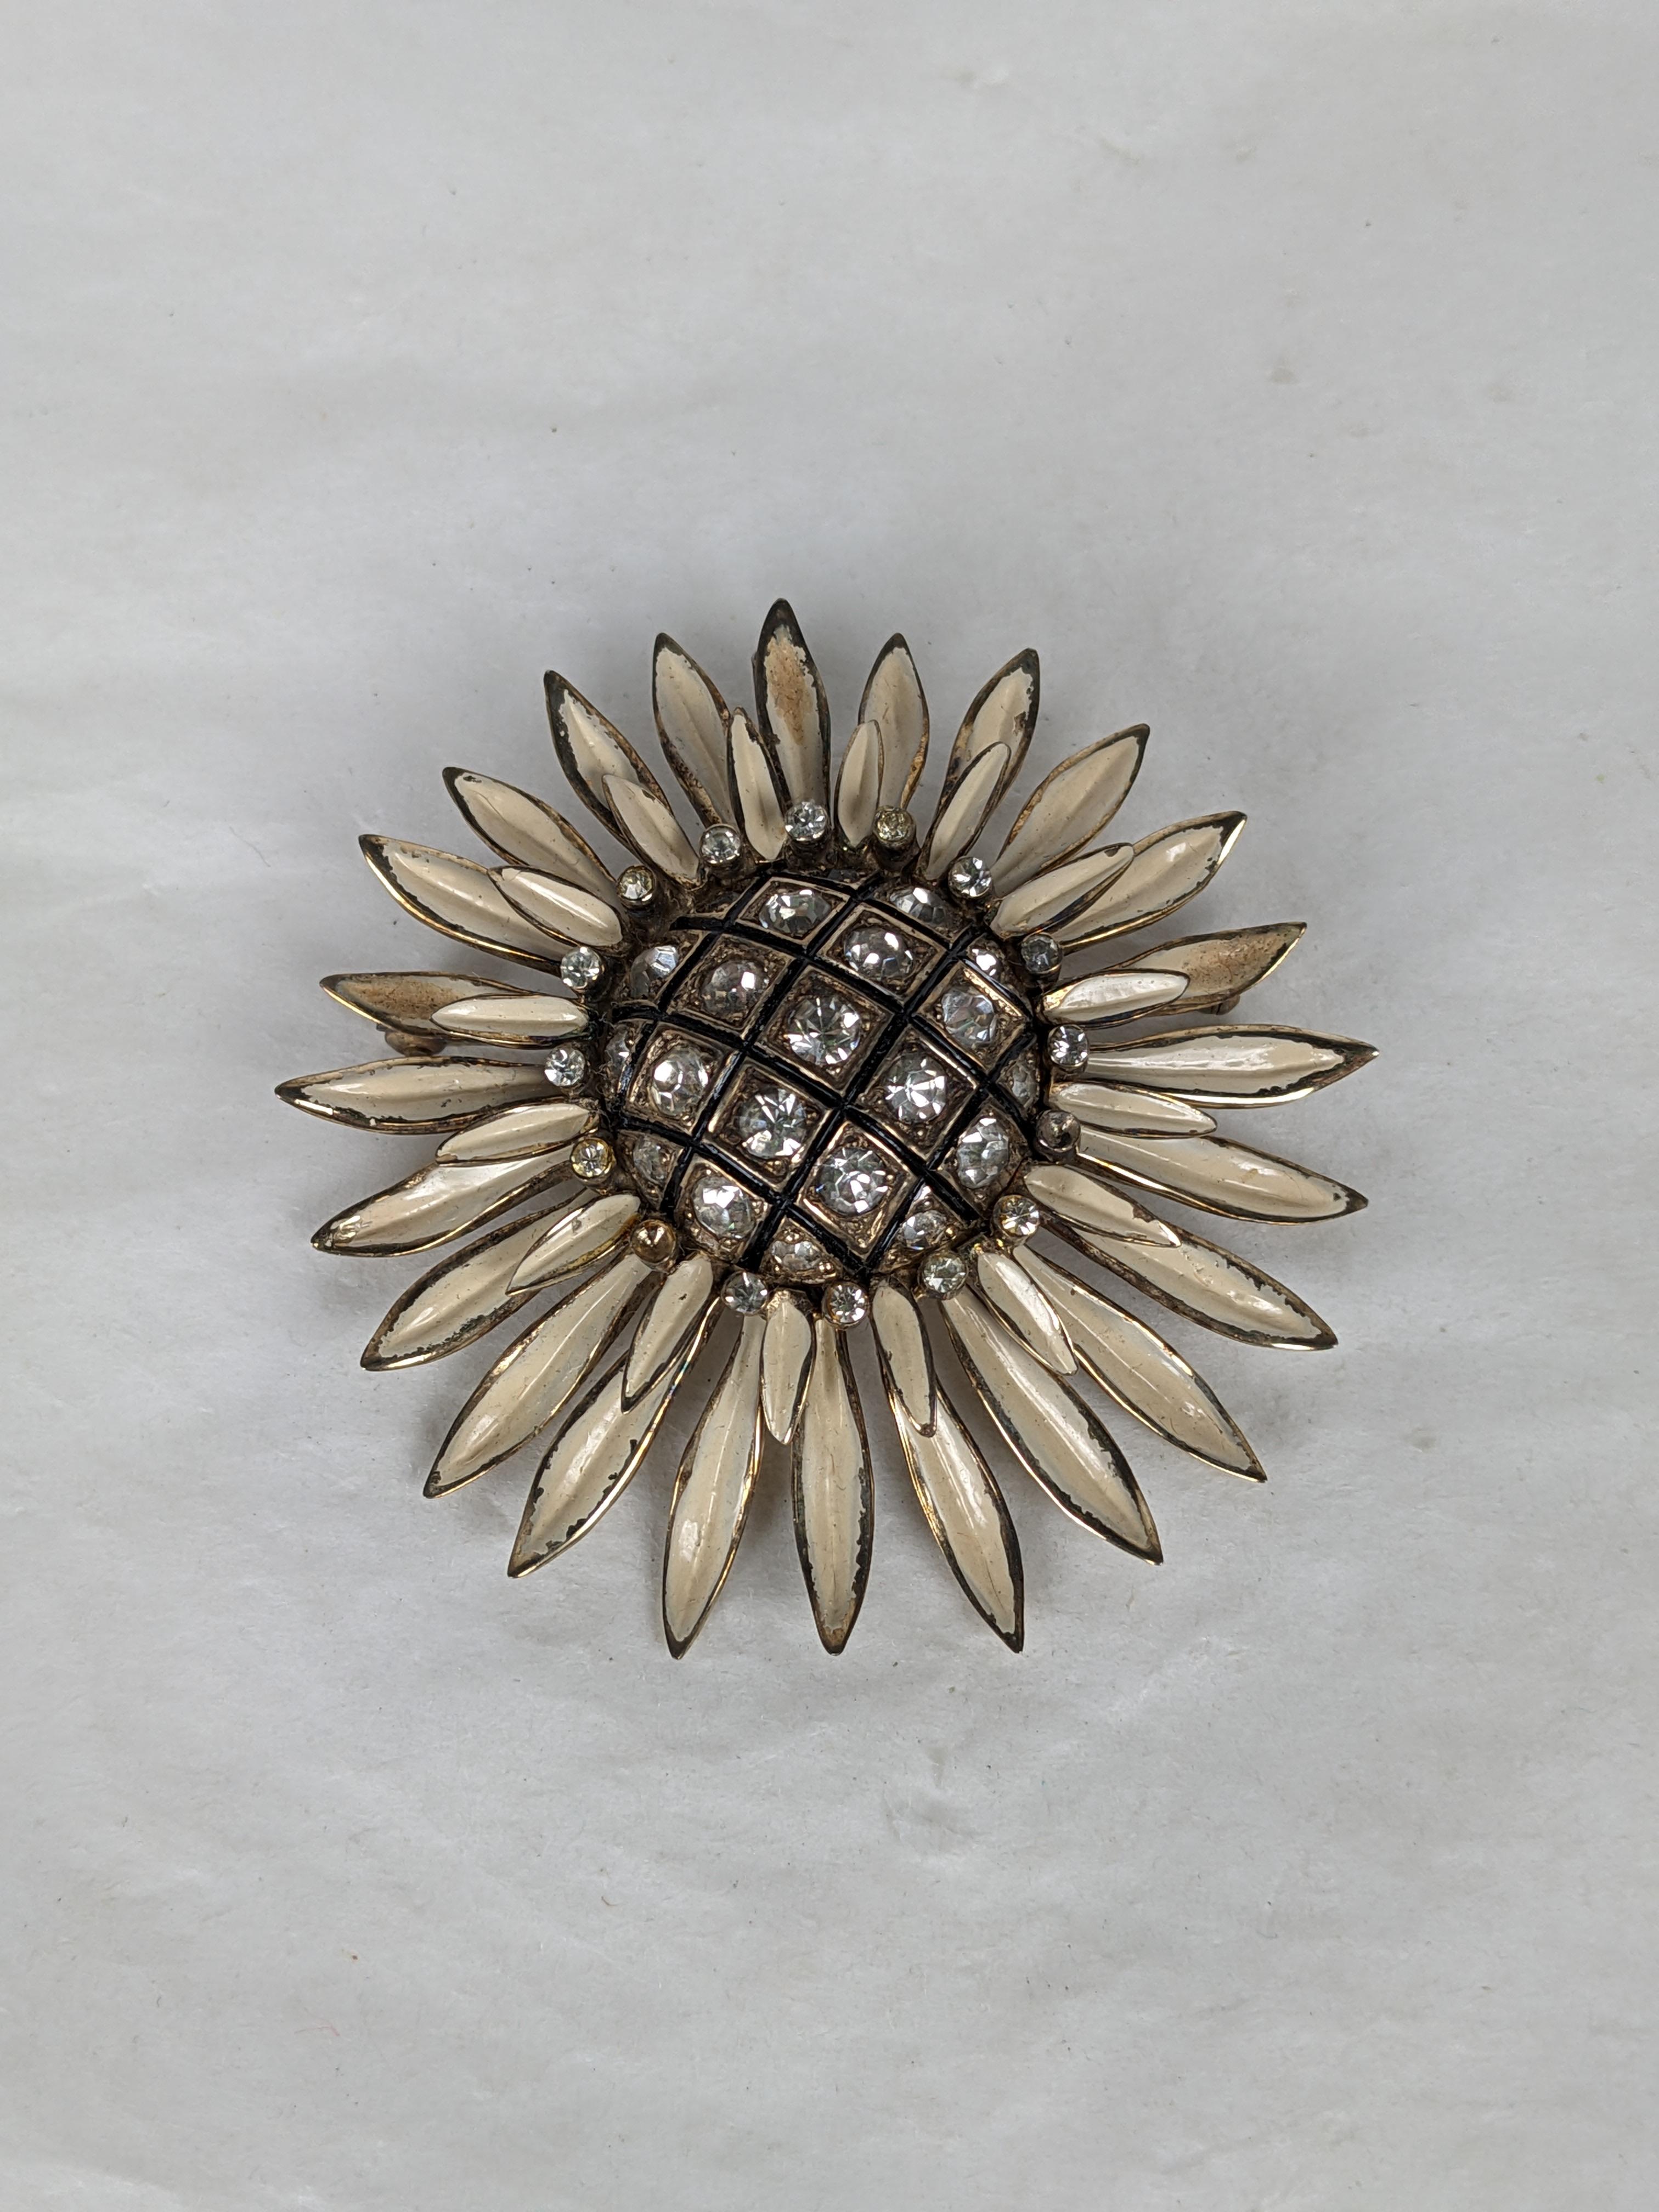 Nettie Rosenstein Retro Sunflower pendant brooch. Of rose gold plated sterling silver, white and black cold enamel and crystal rhinestone pave. Minor wear to enamel. L 2 1/8